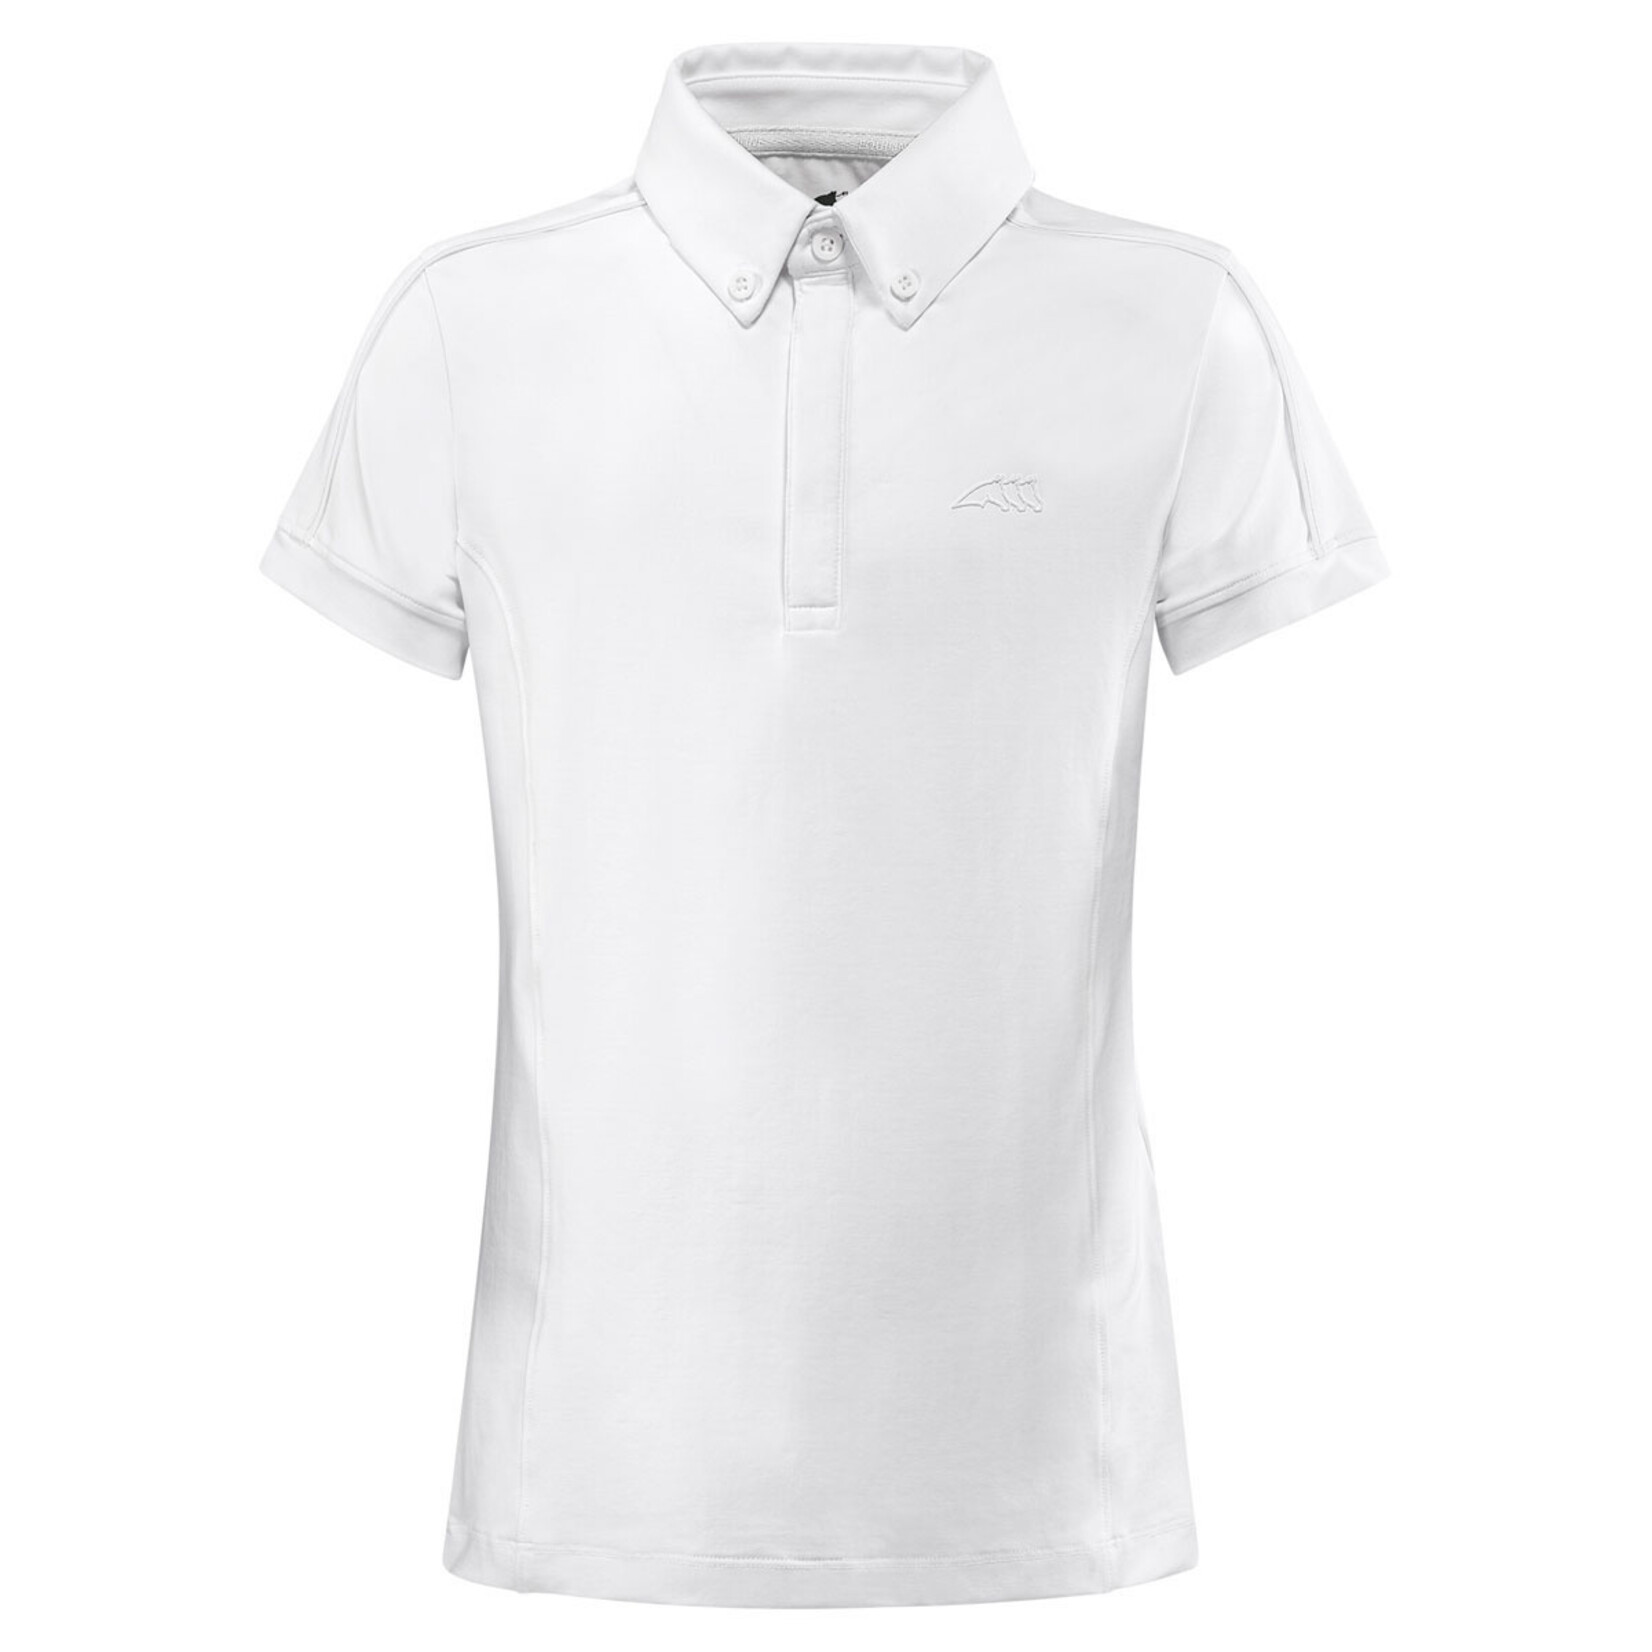 Equiline Equiline Joshua Boys Competition Polo